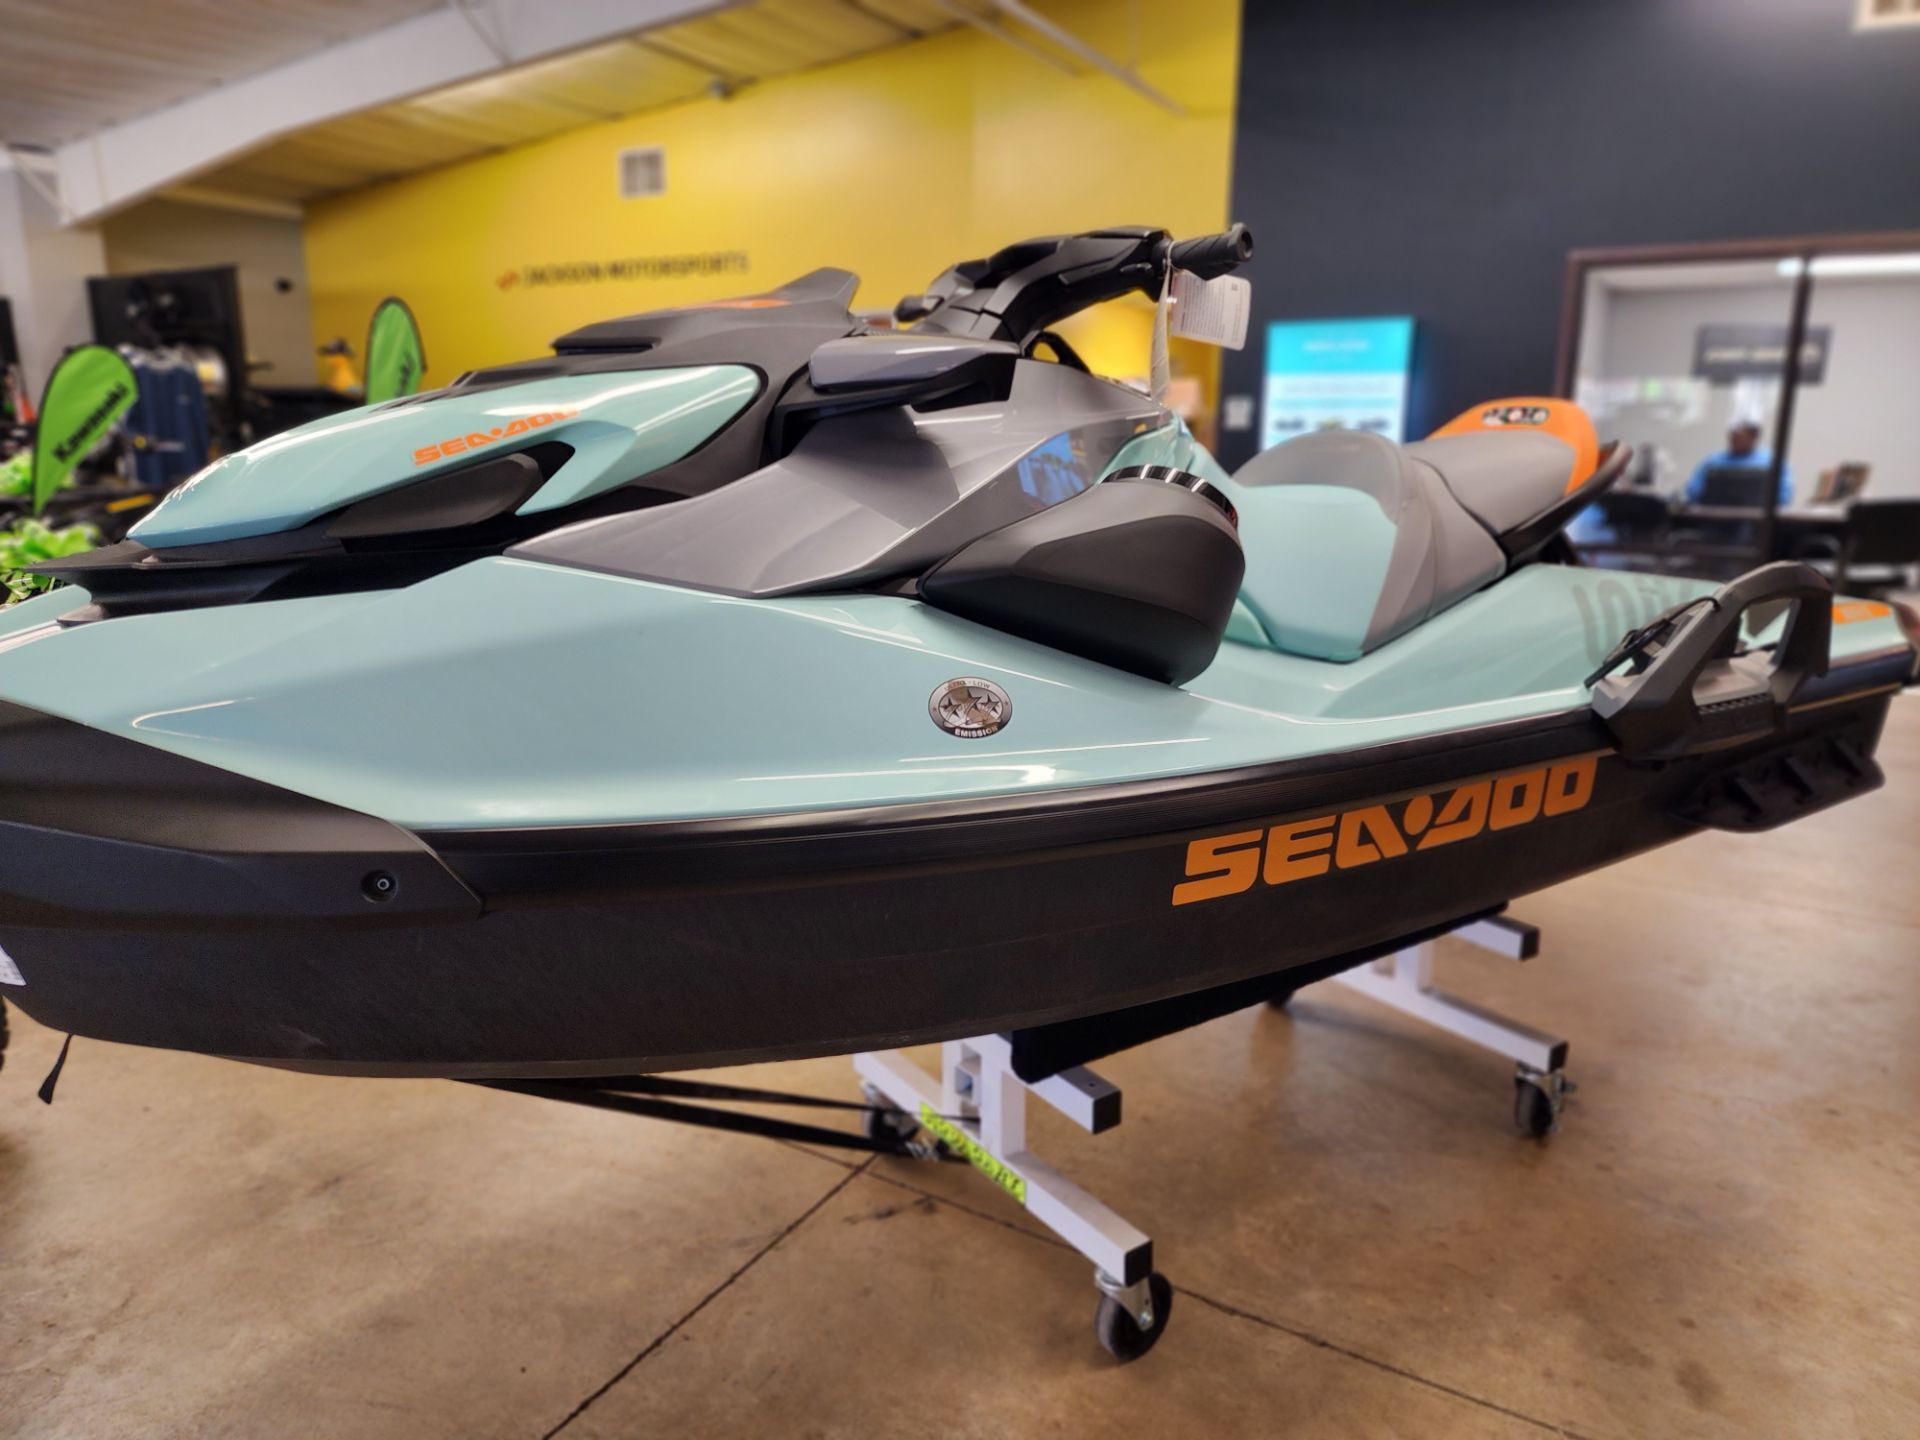 2022 Sea-Doo WAKE 170 iBR + Sound System in Pearl, Mississippi - Photo 2